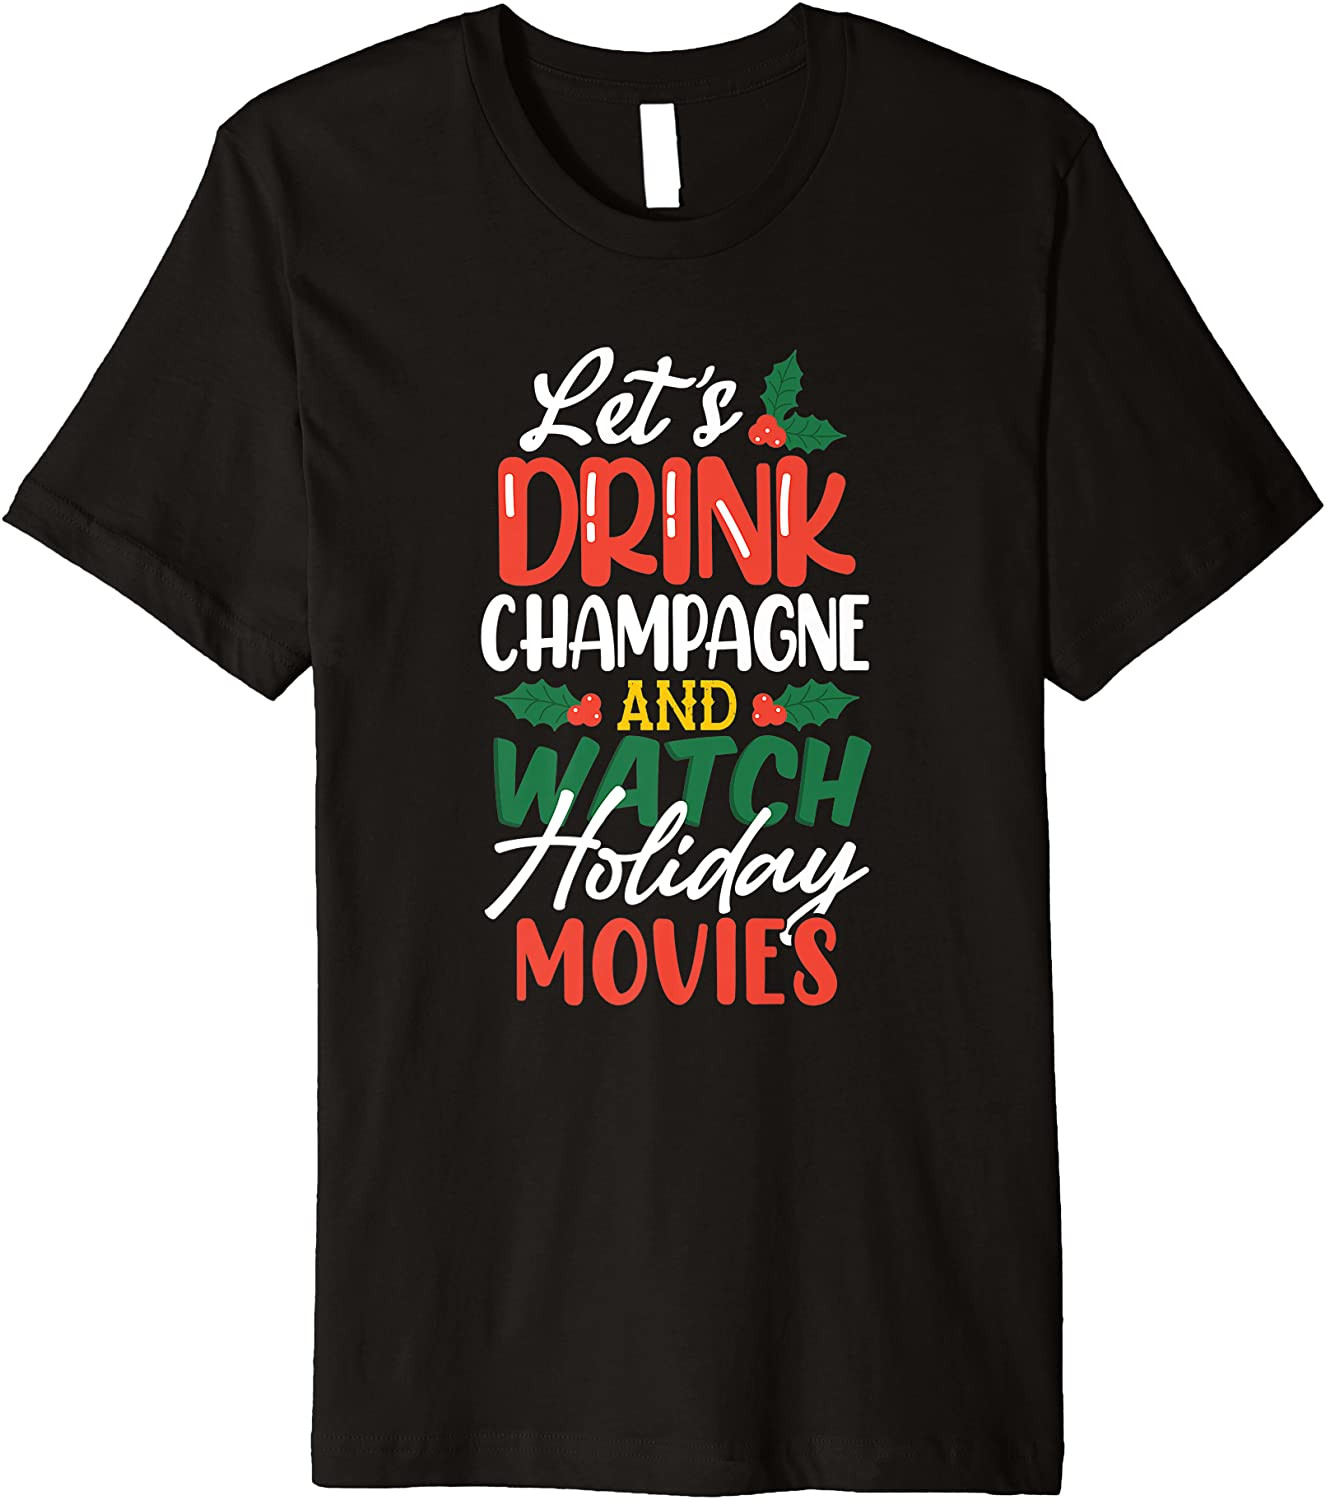 Let's Drink Champagne And Watch Holiday Movies T-Shirt